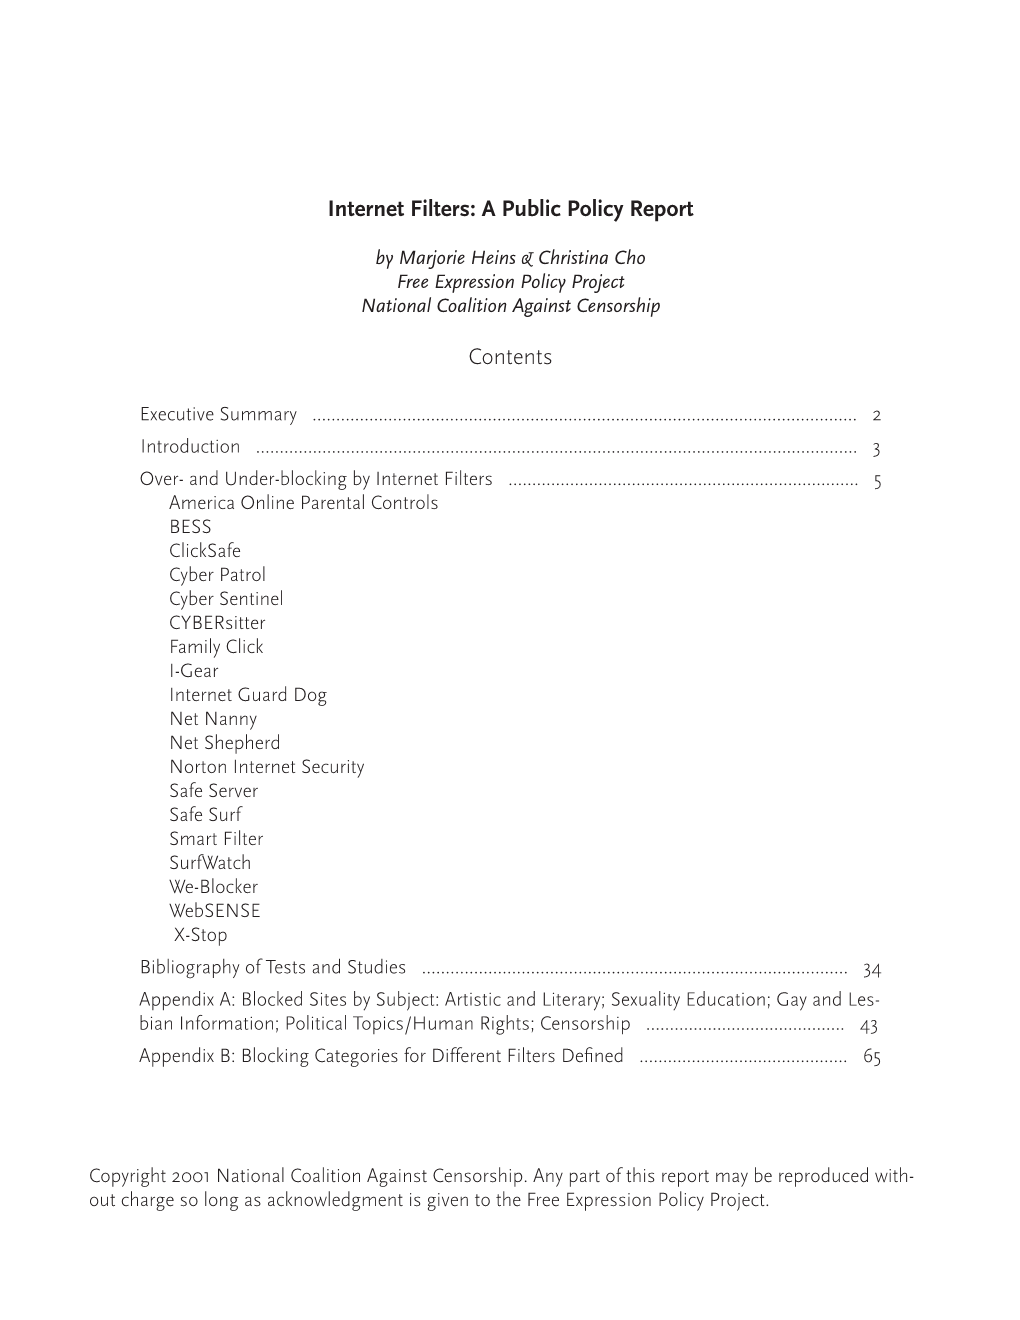 Internet Filters: a Public Policy Report